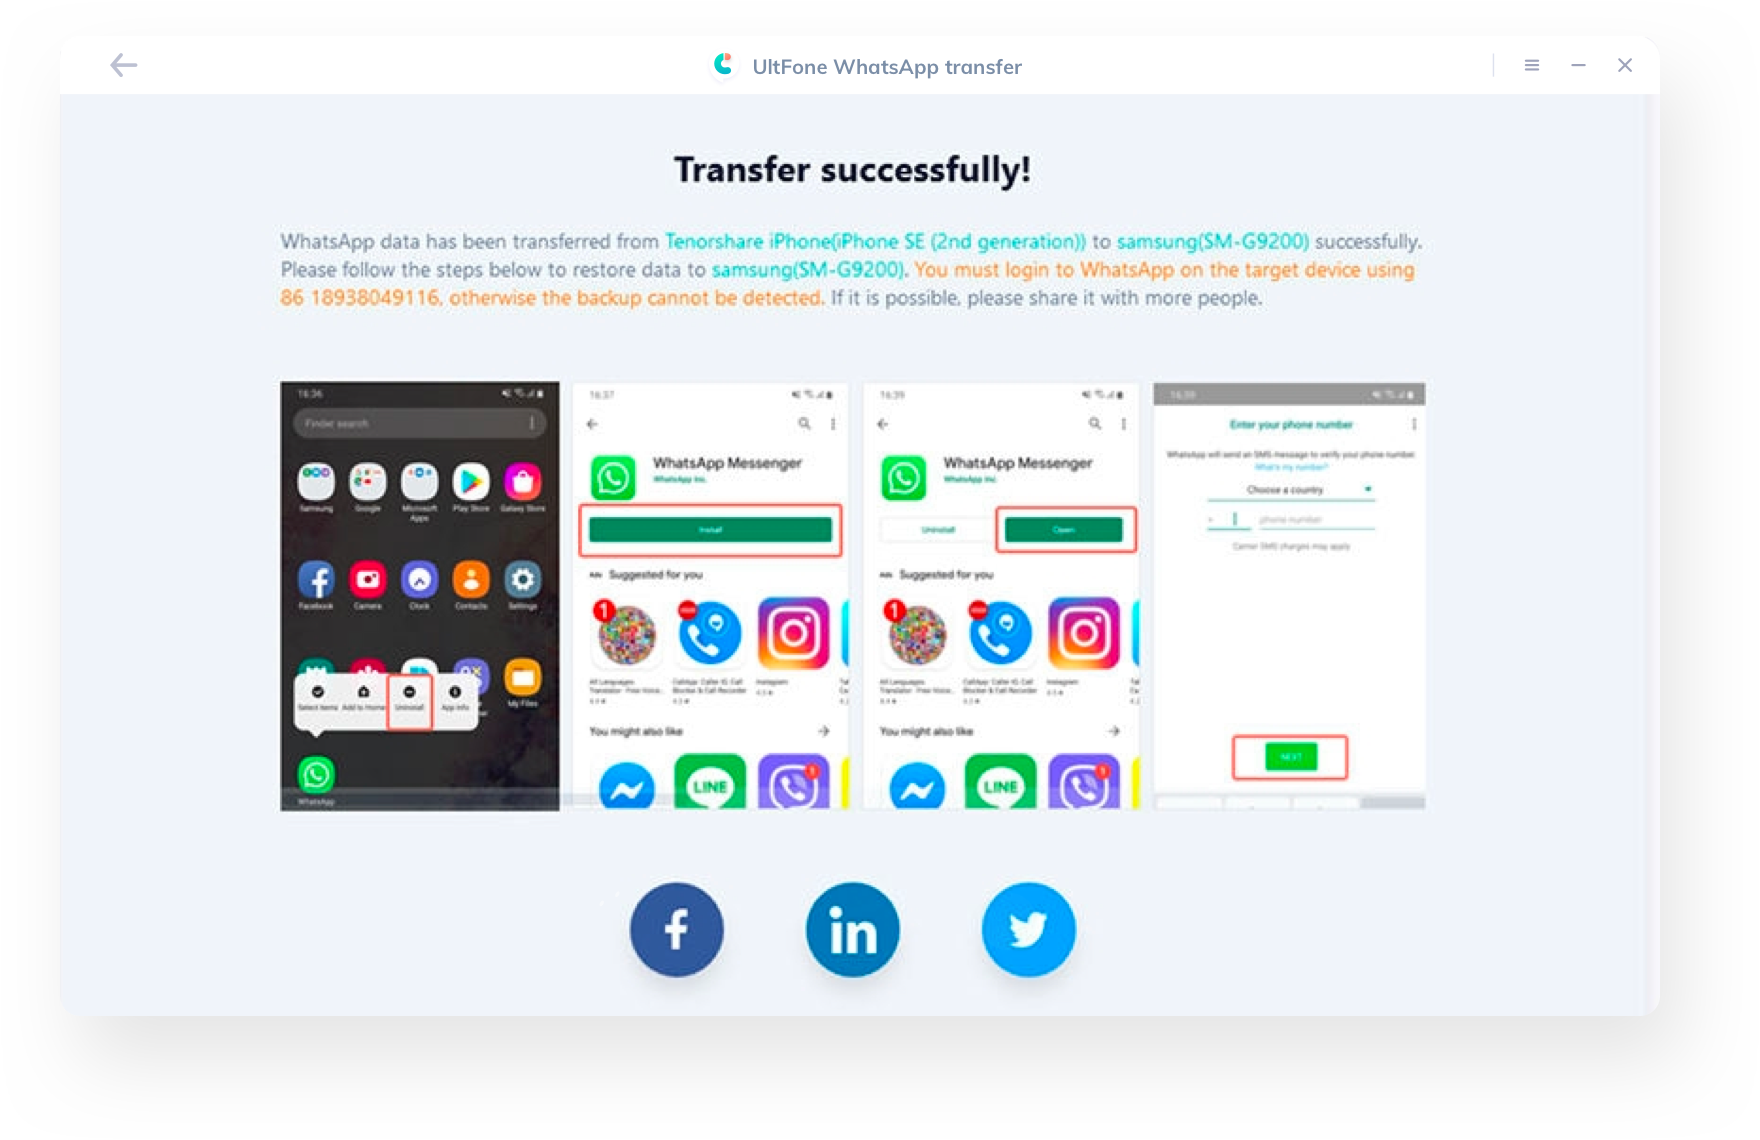 whatsapp transfer from iphone to android successfully